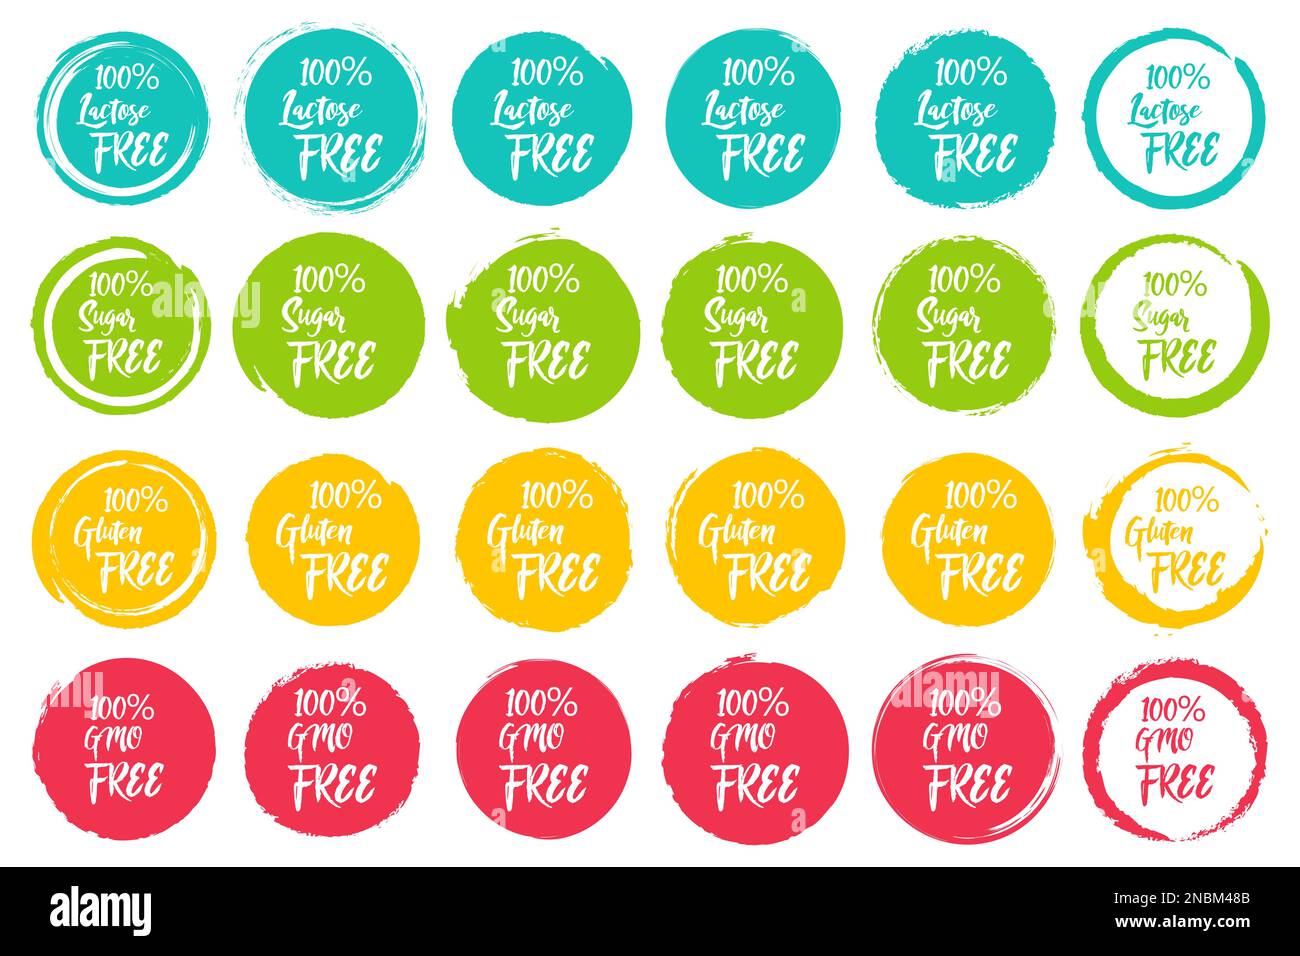 Set of round labels with text - lactose free, sugar free, gluten free, gmo free. Grunge circles shapes for text Stock Vector